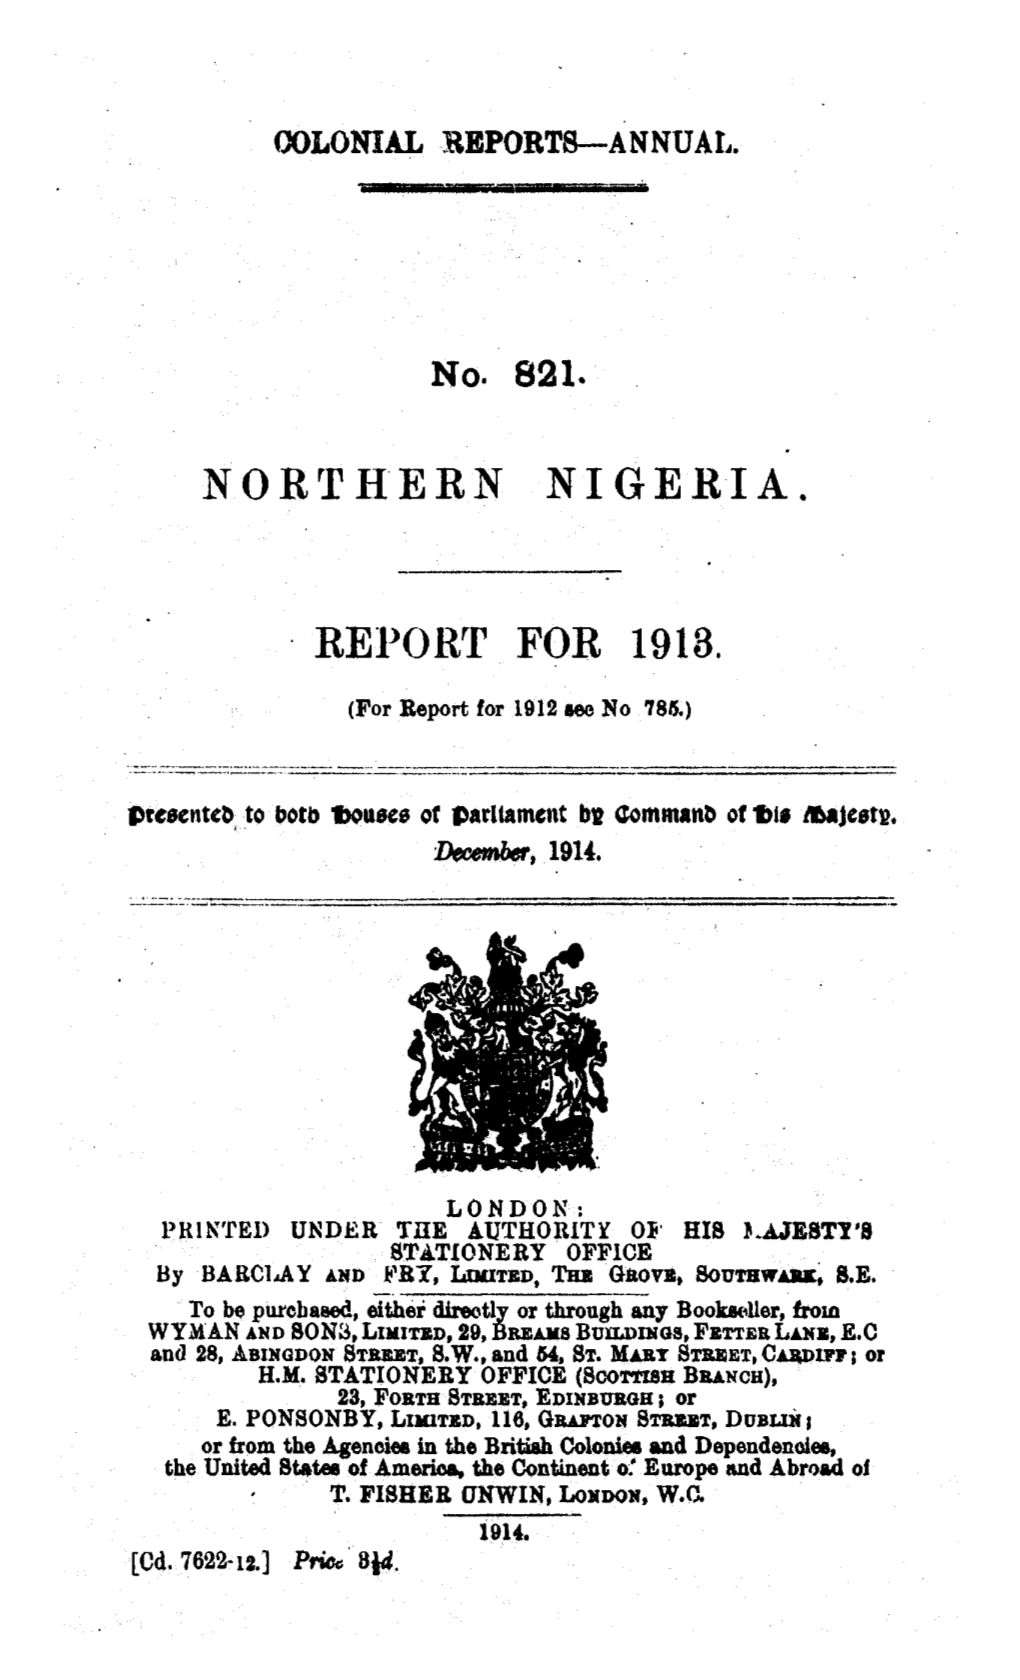 Annual Report of the Colonies, Northern Nigeria, 1913